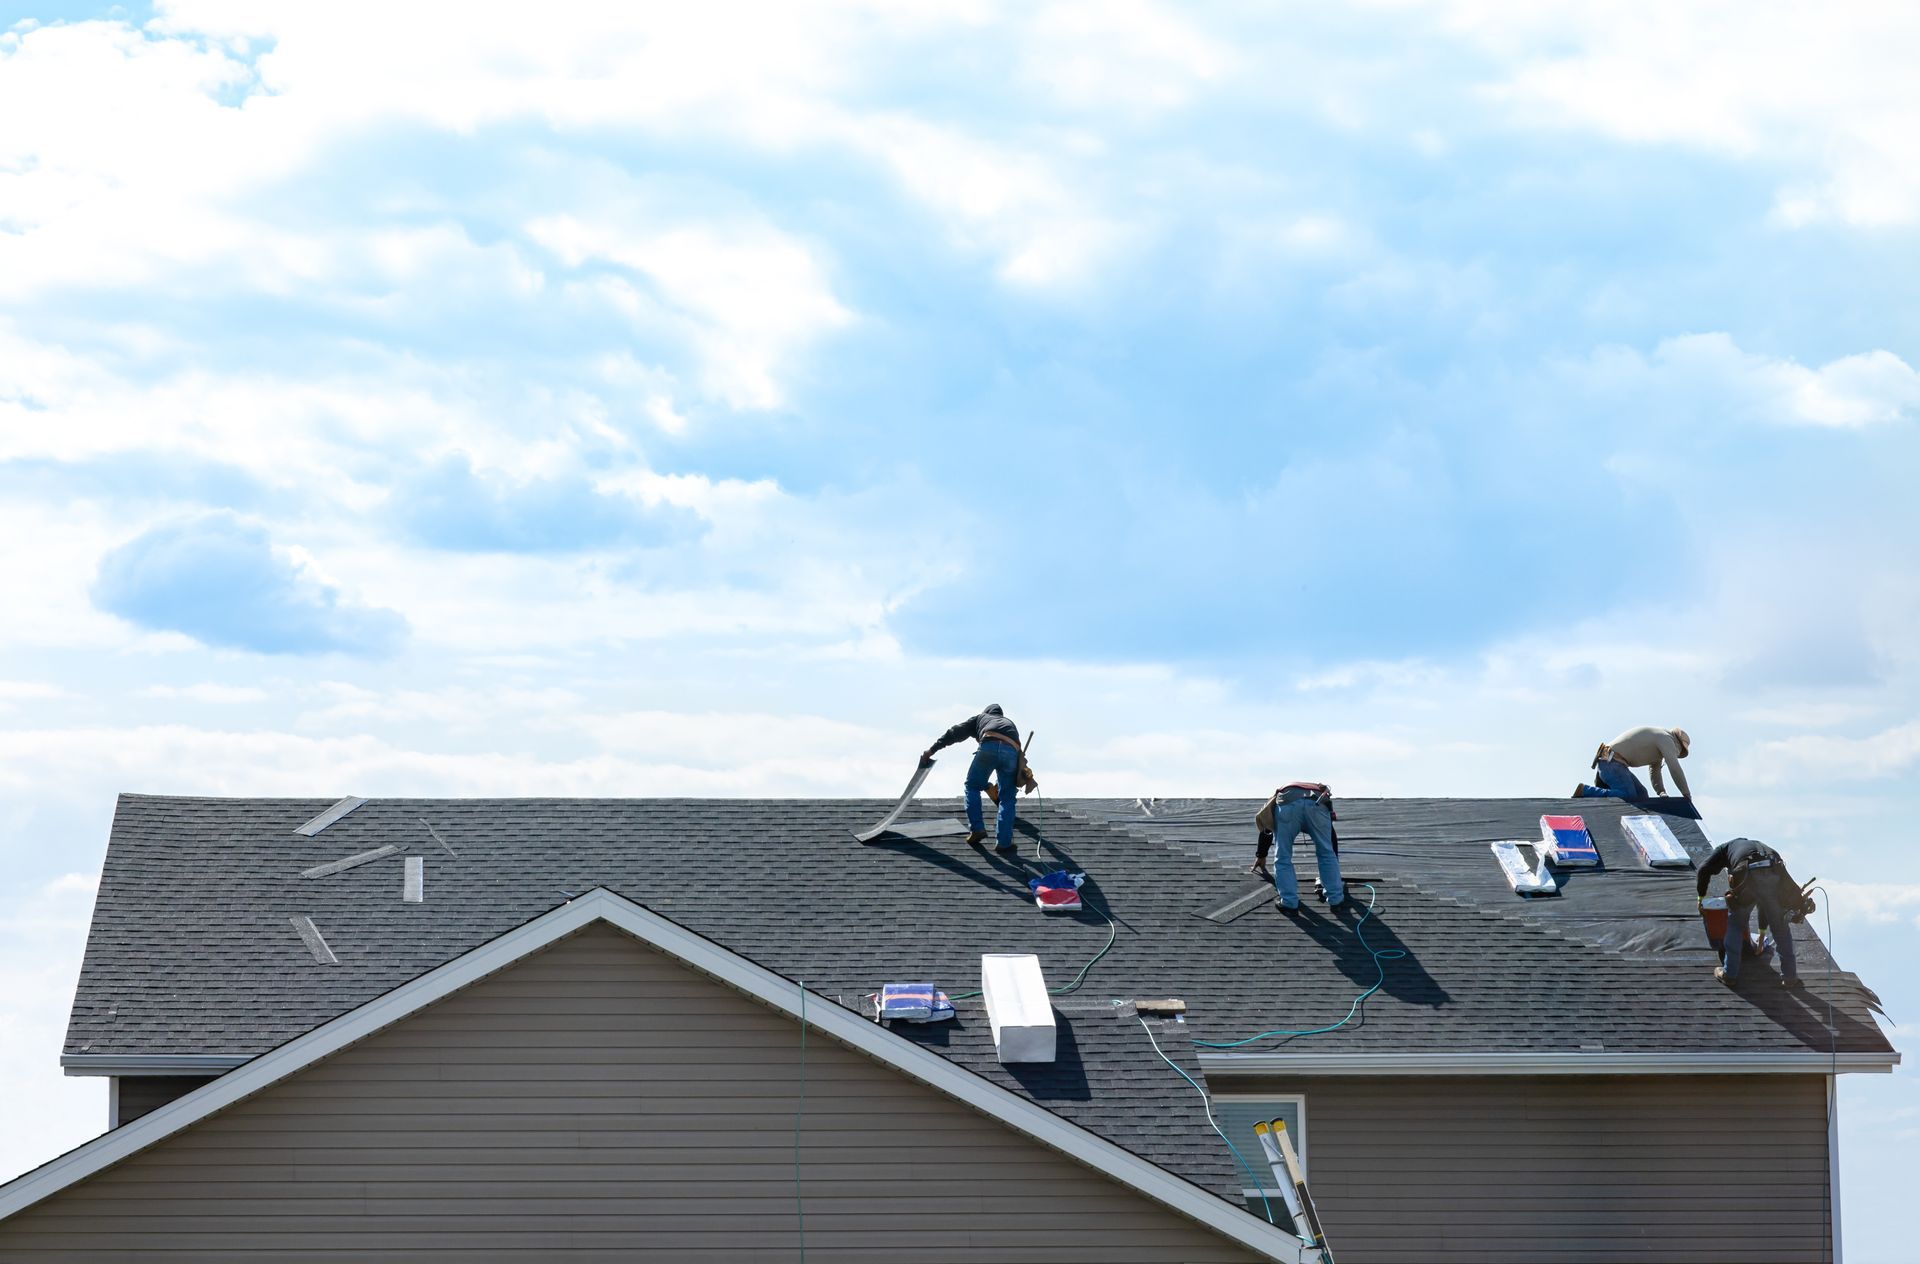 A group of men are working on the roof of a house.